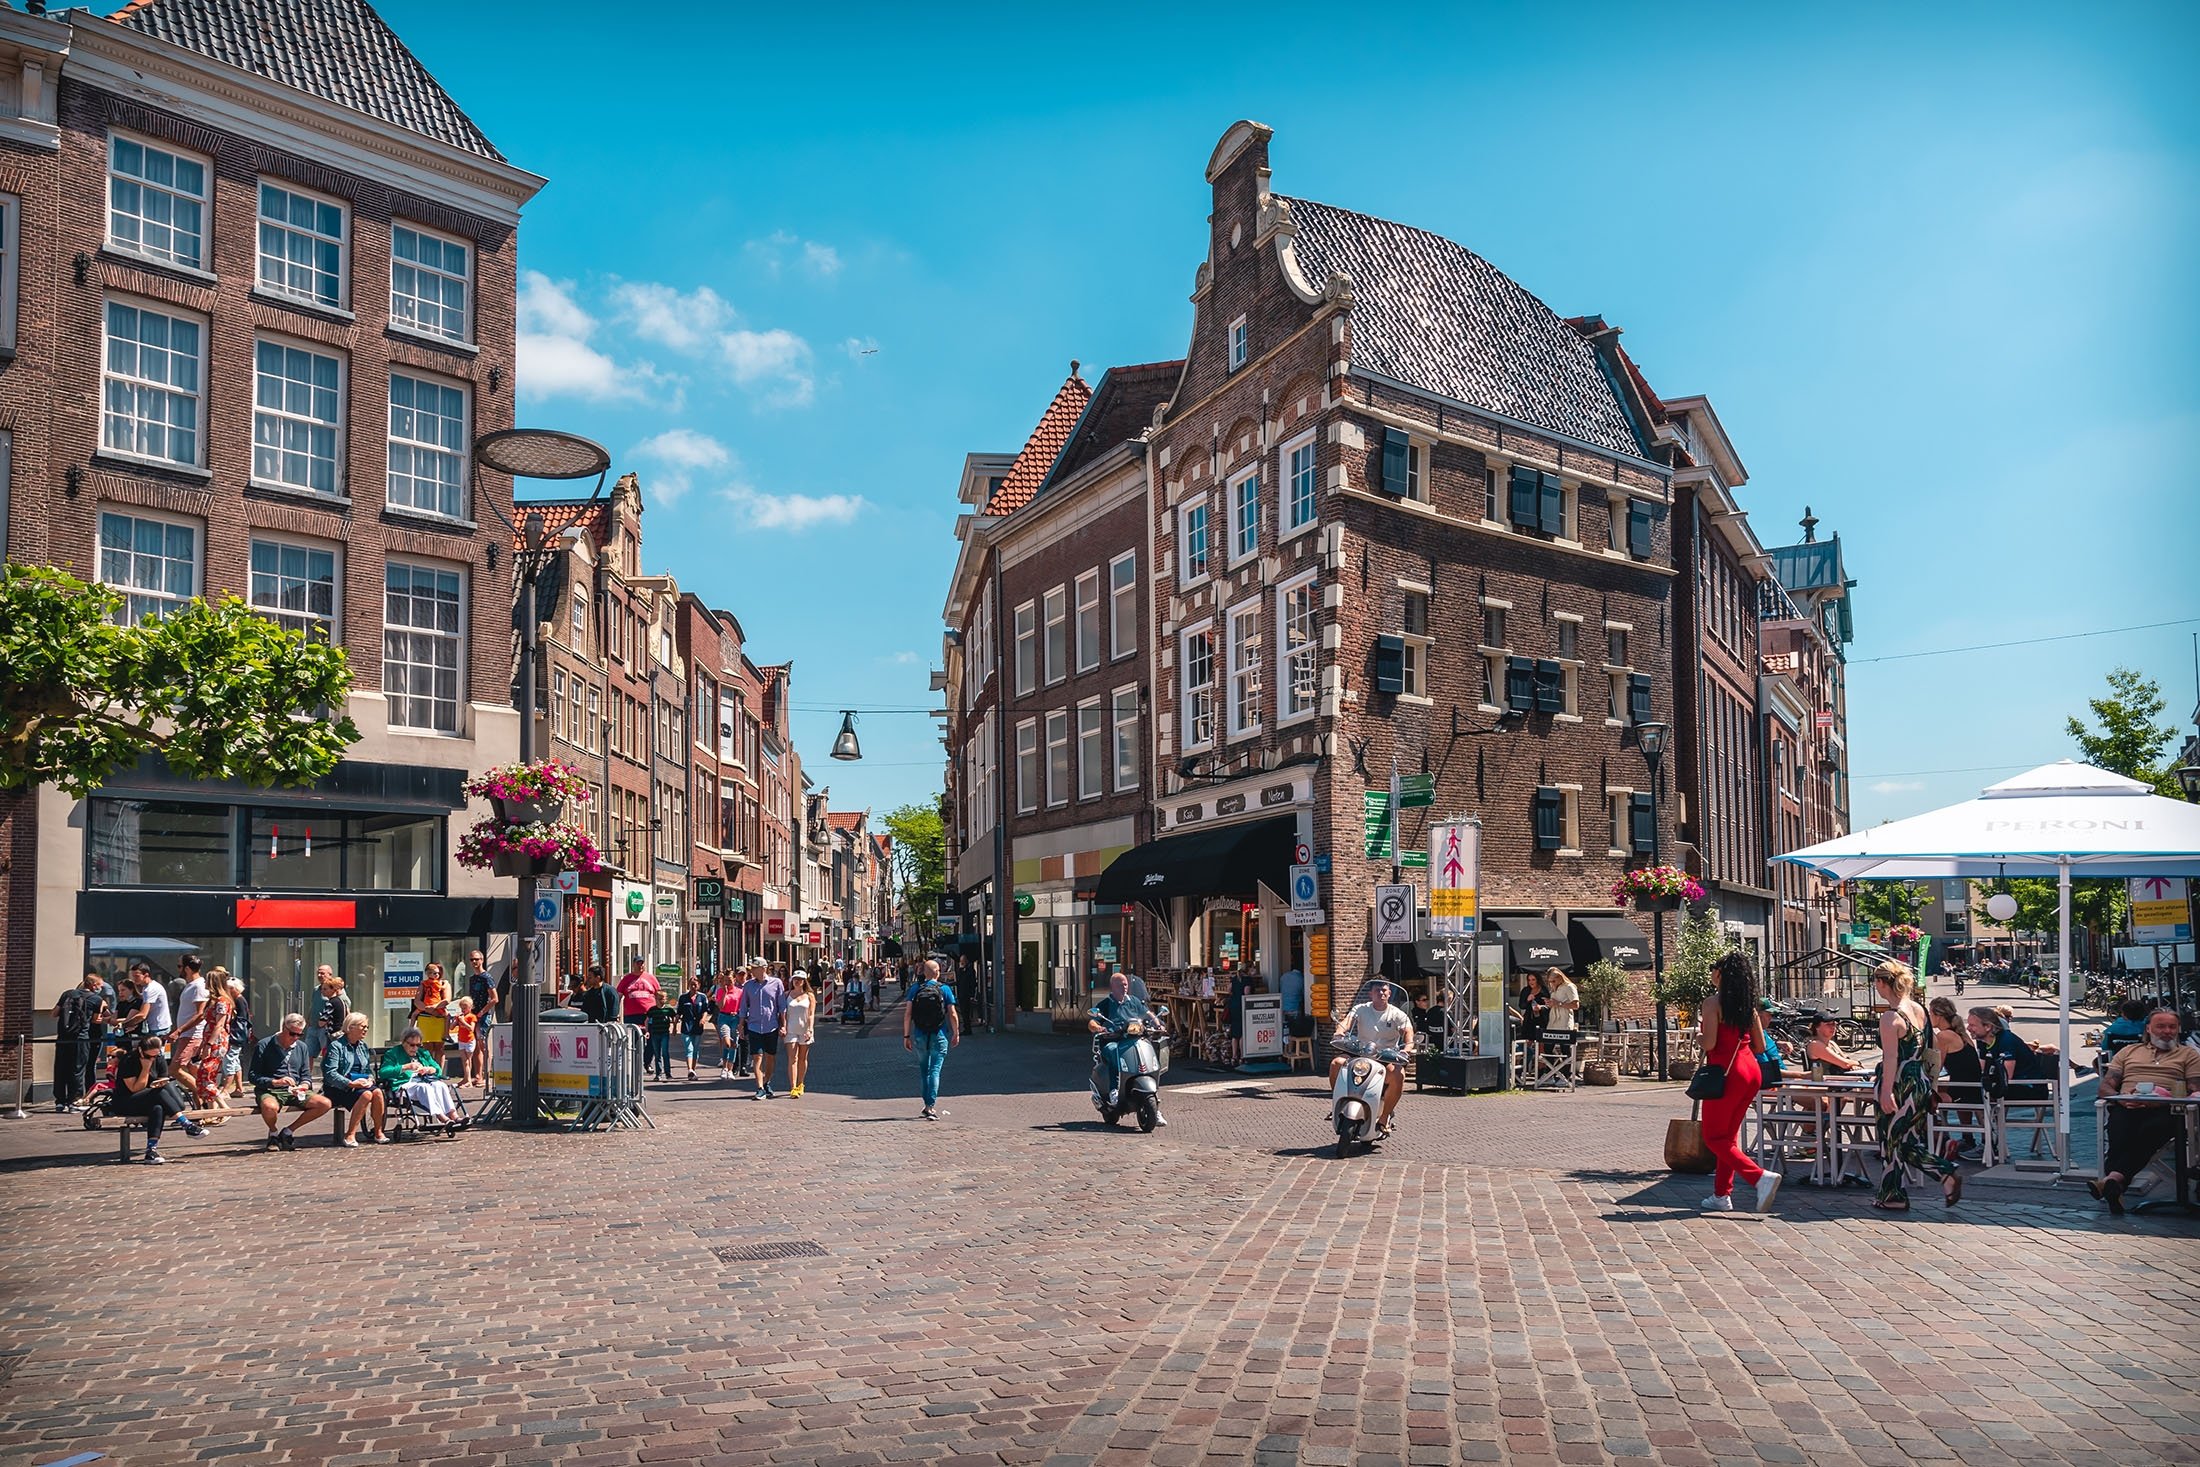 The central square of Zwolle, the Netherlands. (Shutterstock Photo)